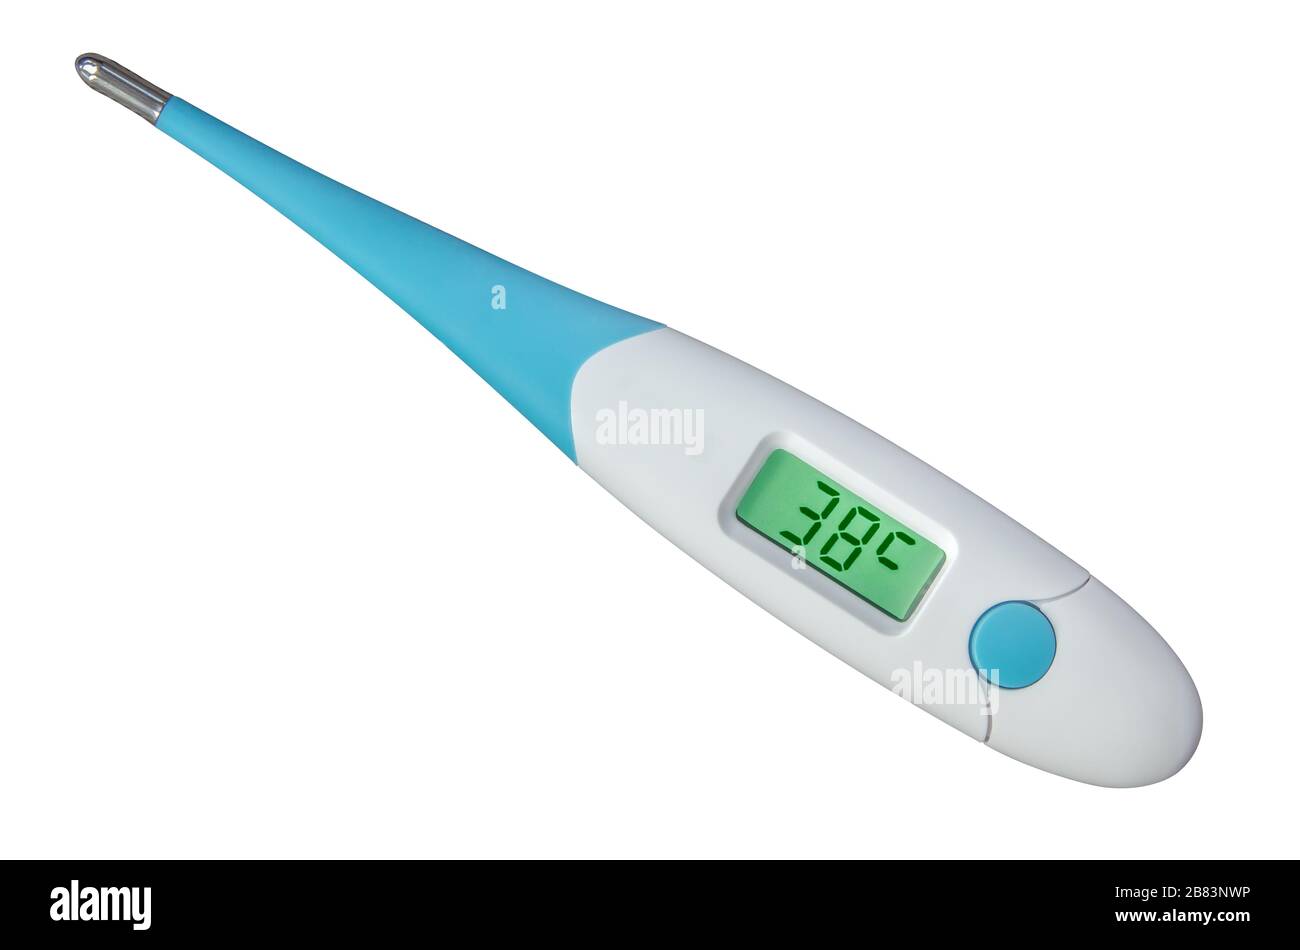 Isolated Digital Smart Thermometer Reading A 38 Degrees Fever During The Coronavirus Pandemic Stock Photo